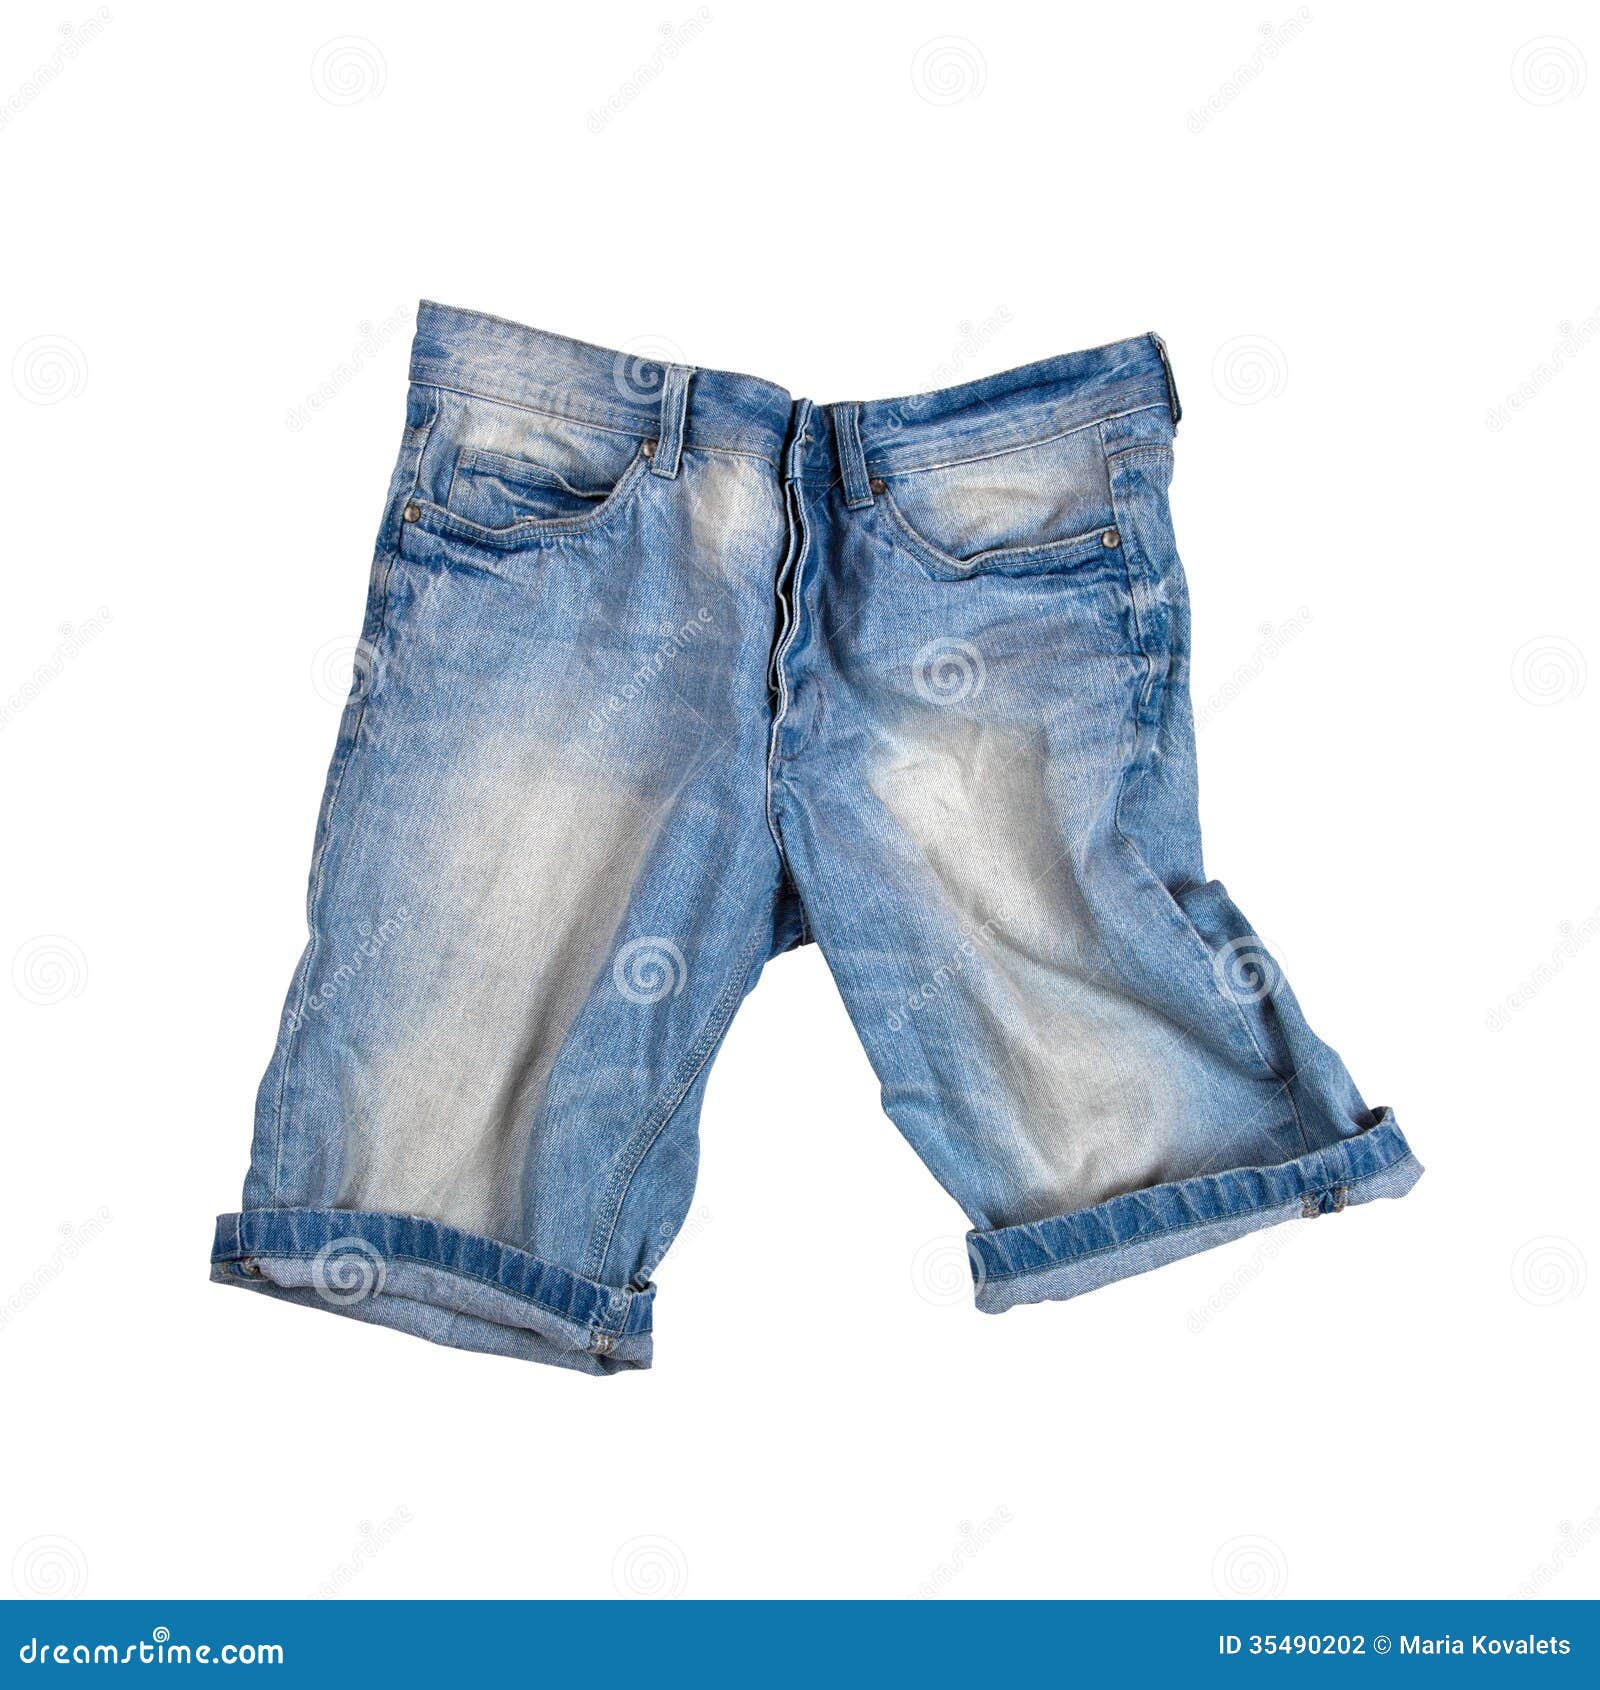 Blue jeans shorts stock photo. Image of color, cloth - 35490202